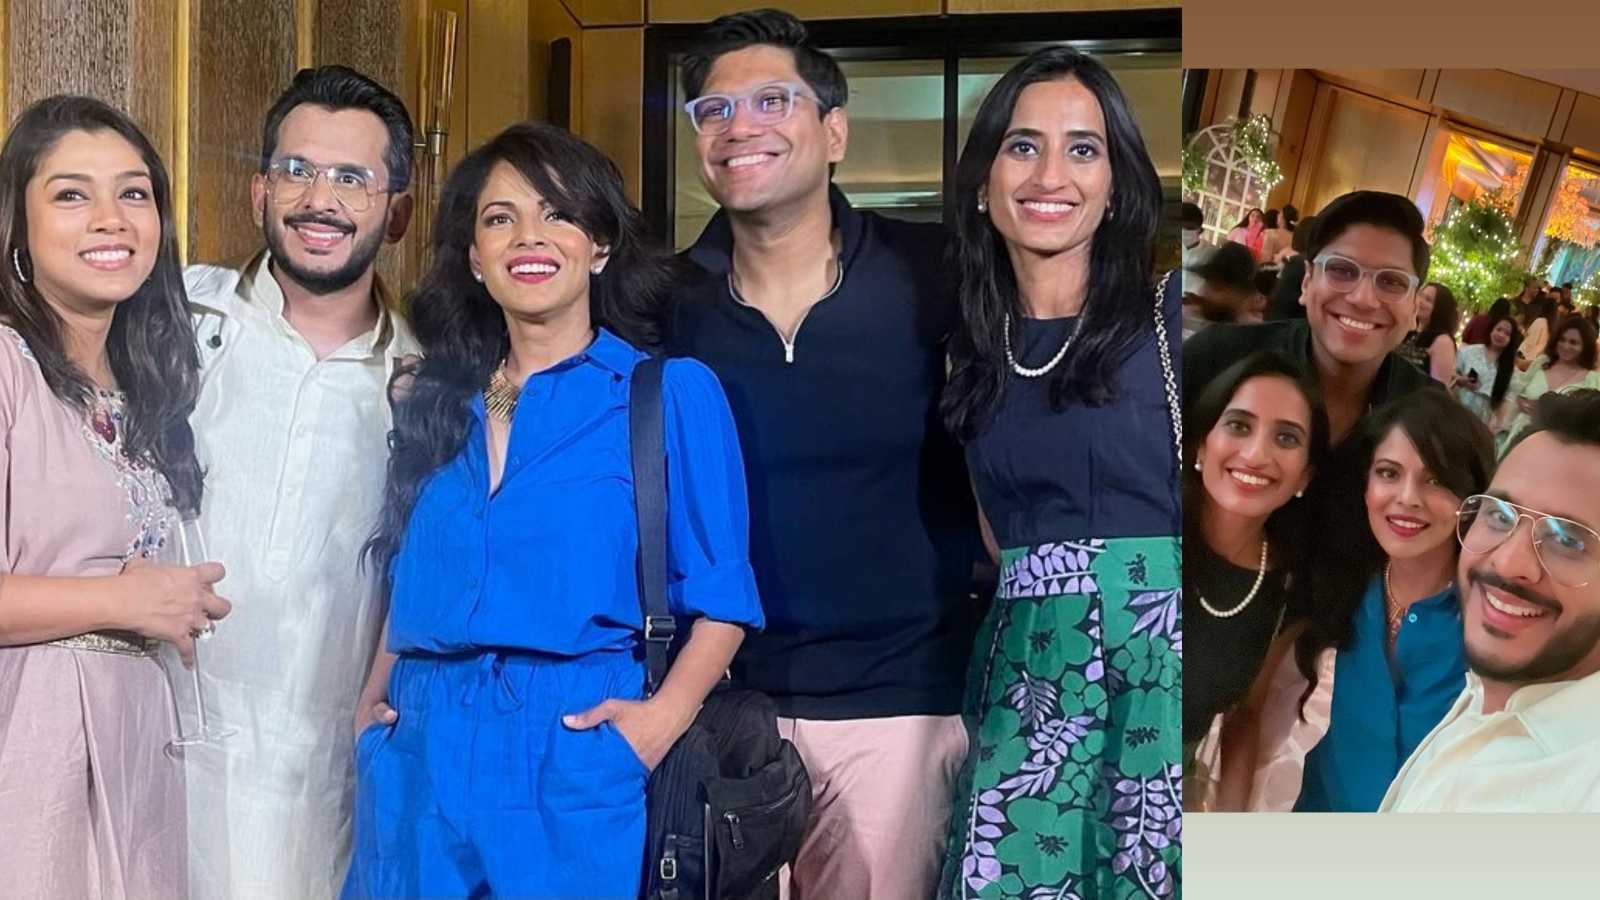 Shark Tank India judges reunite for a party, Namita Thapar shares pictures also featuring 'future sharks'